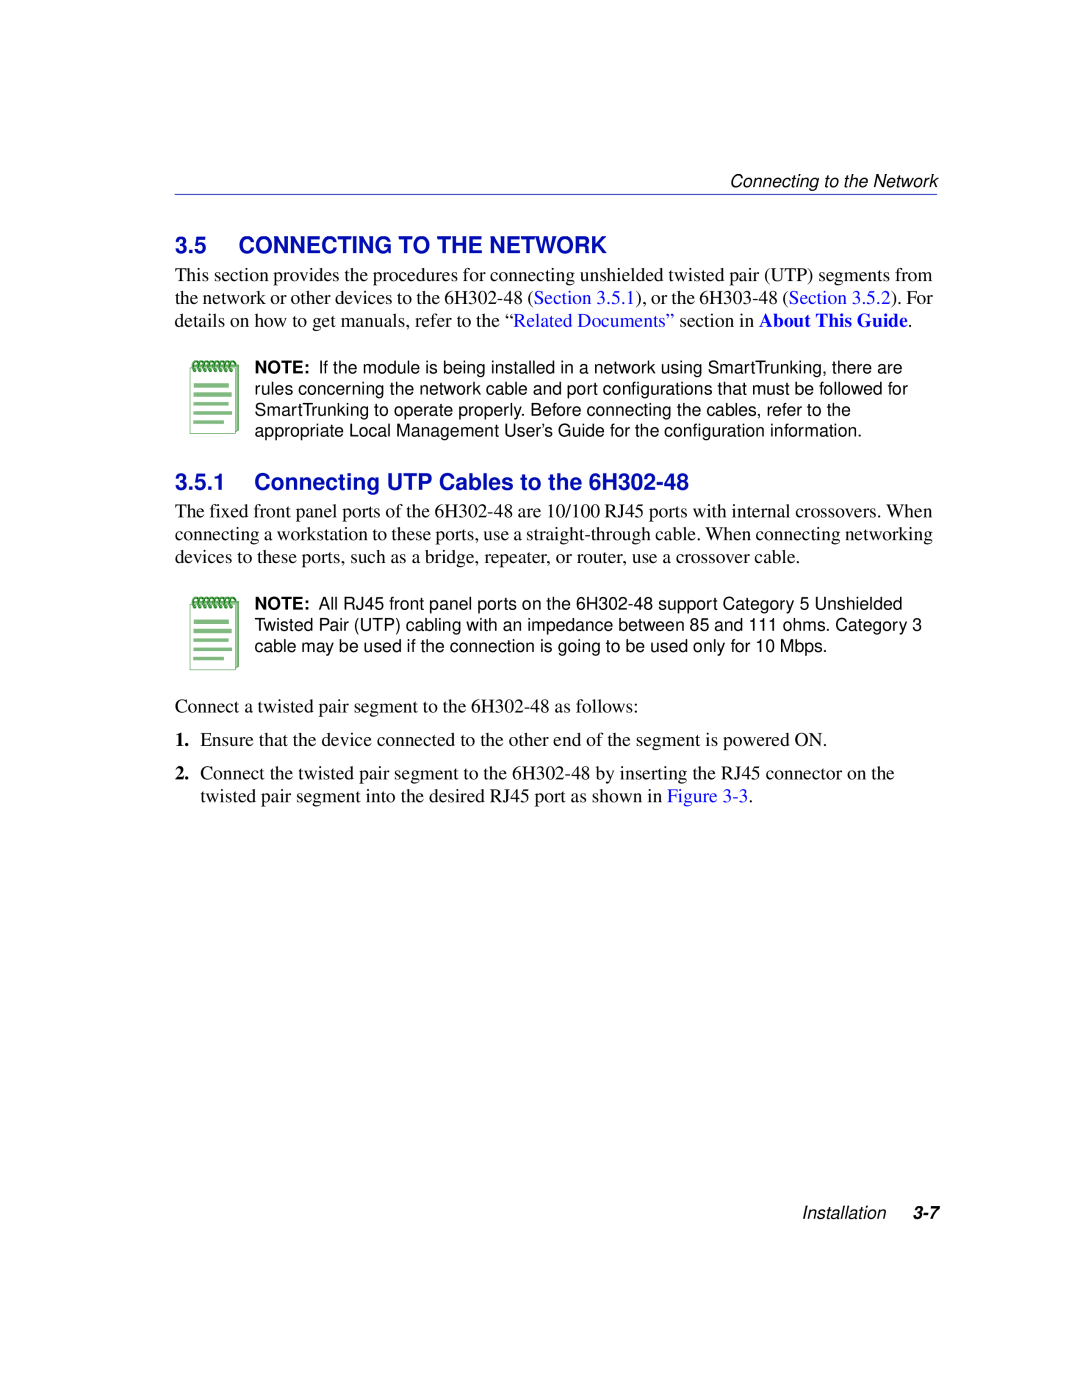 Enterasys Networks manual Connecting To The Network, Connecting UTP Cables to the 6H302-48 